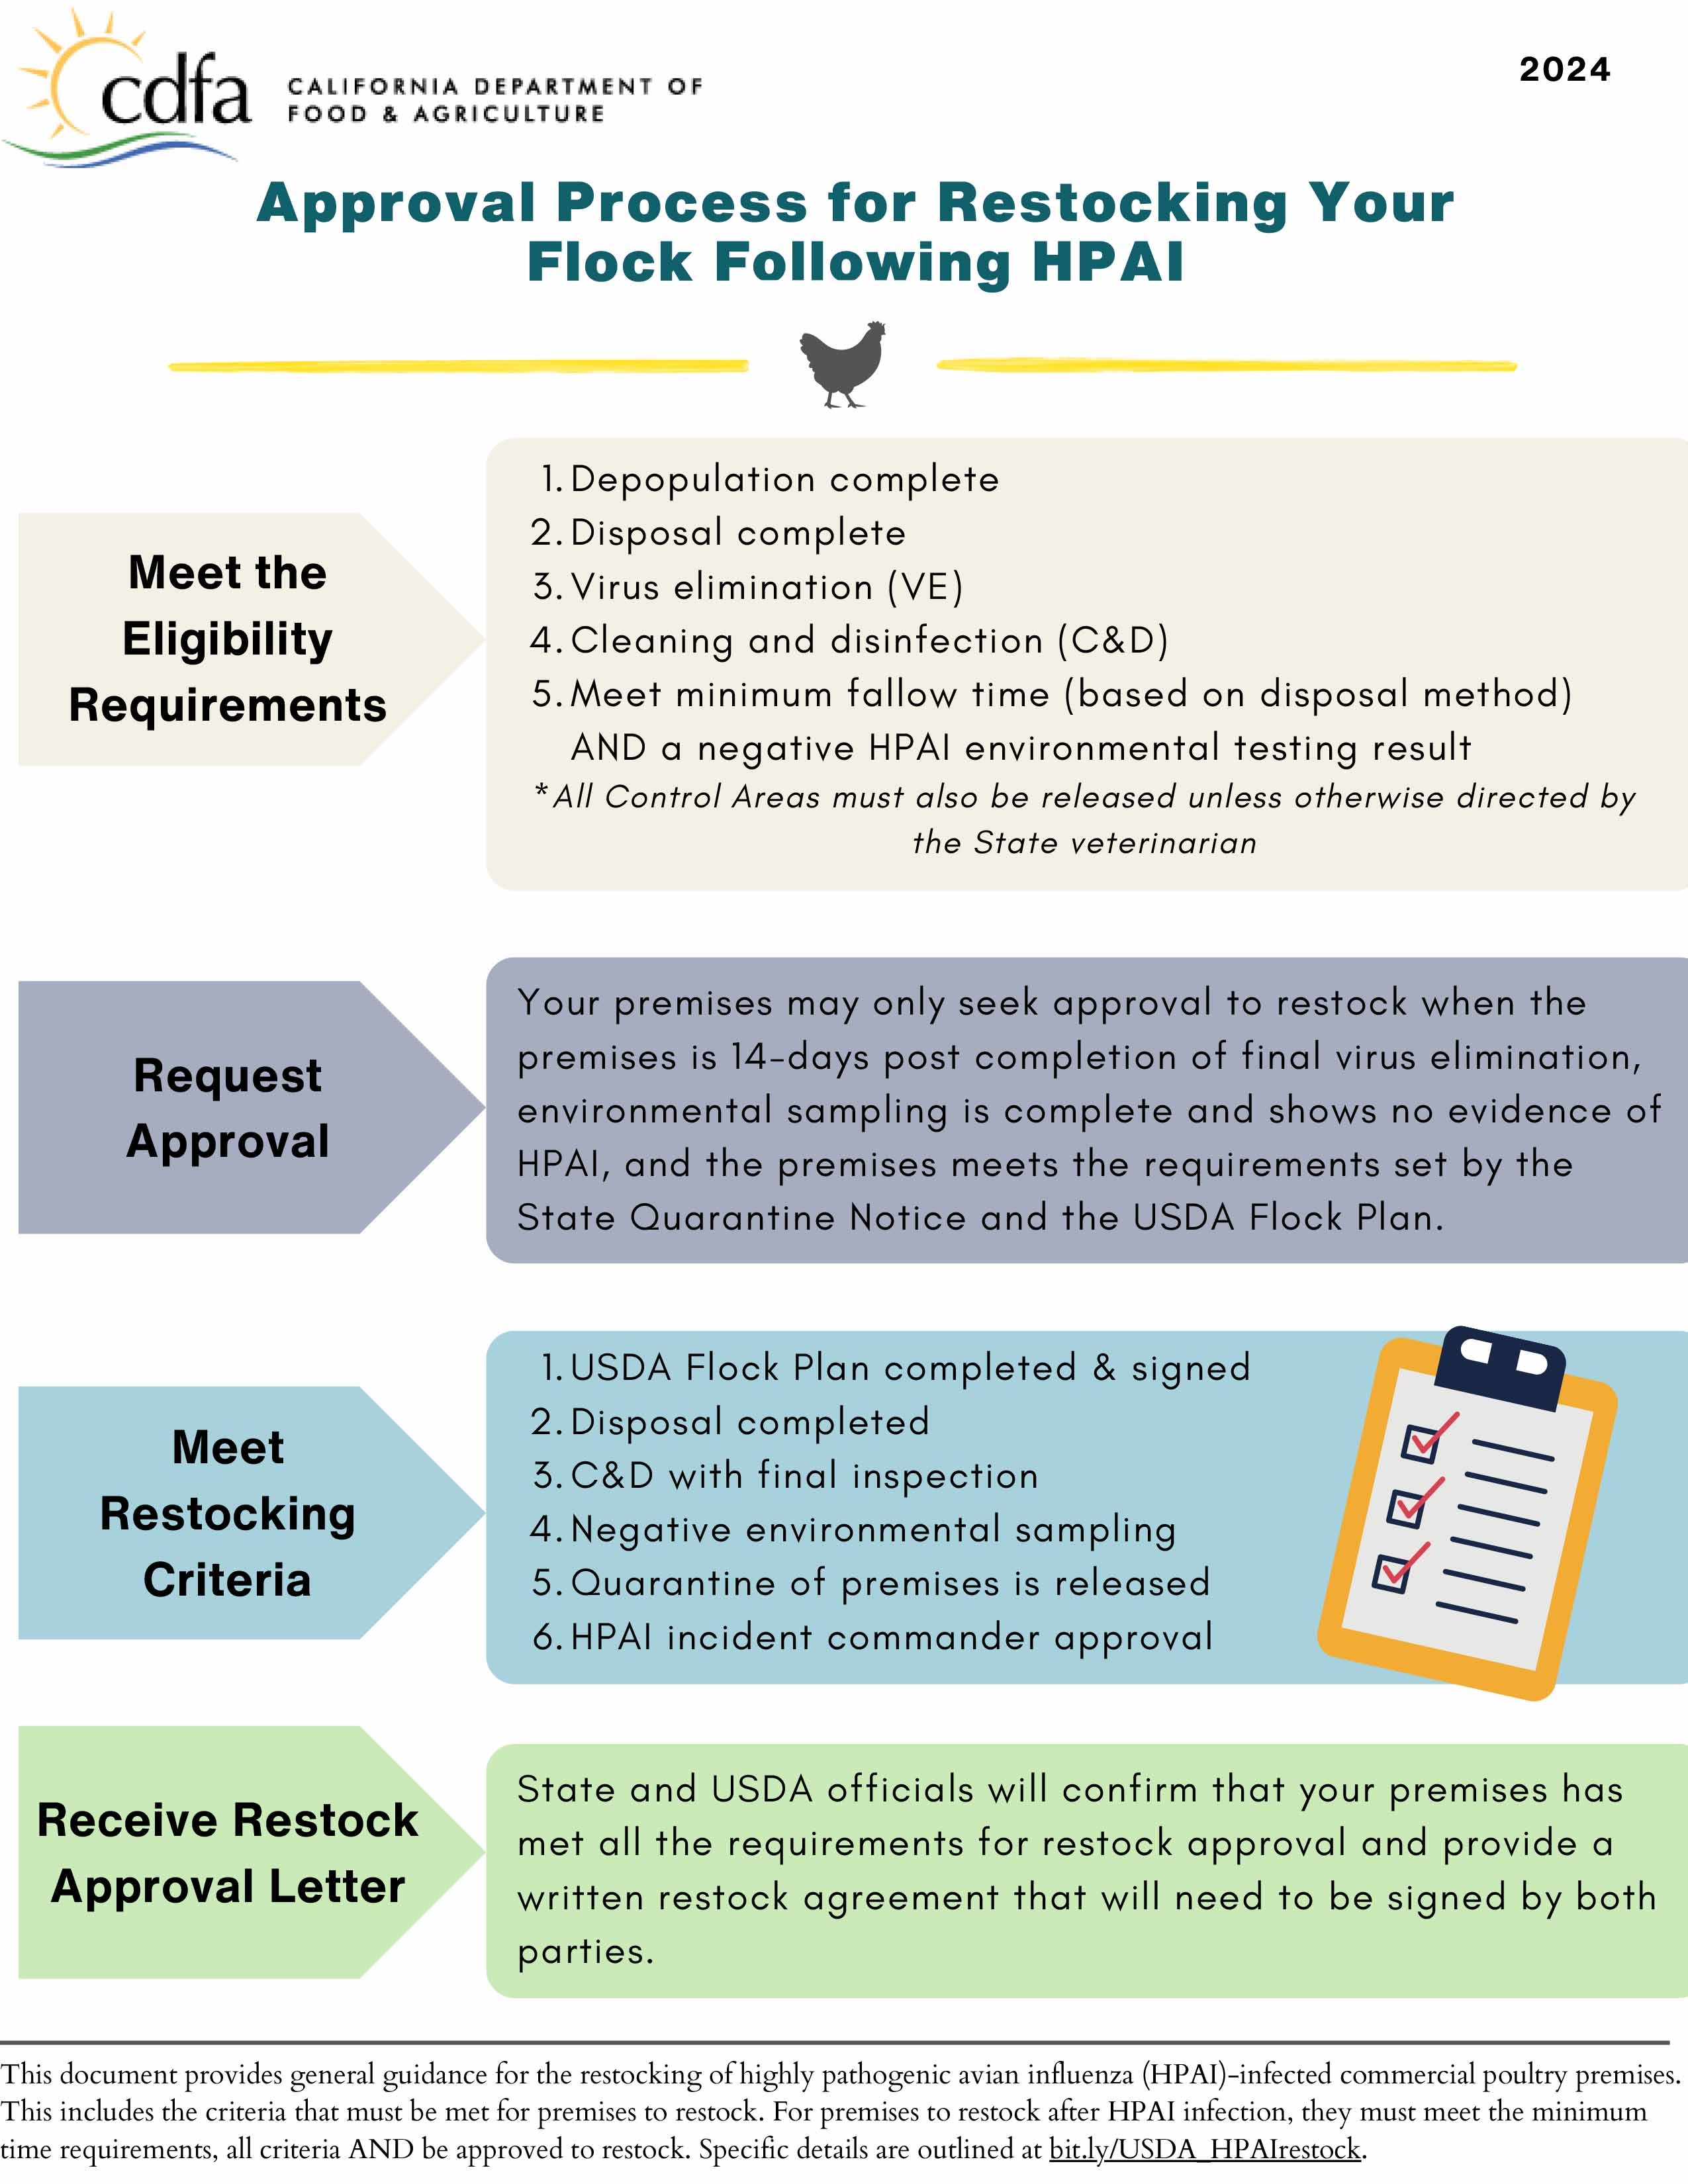 pproval Process for Restocking Your Flock Following HPAI Infographic